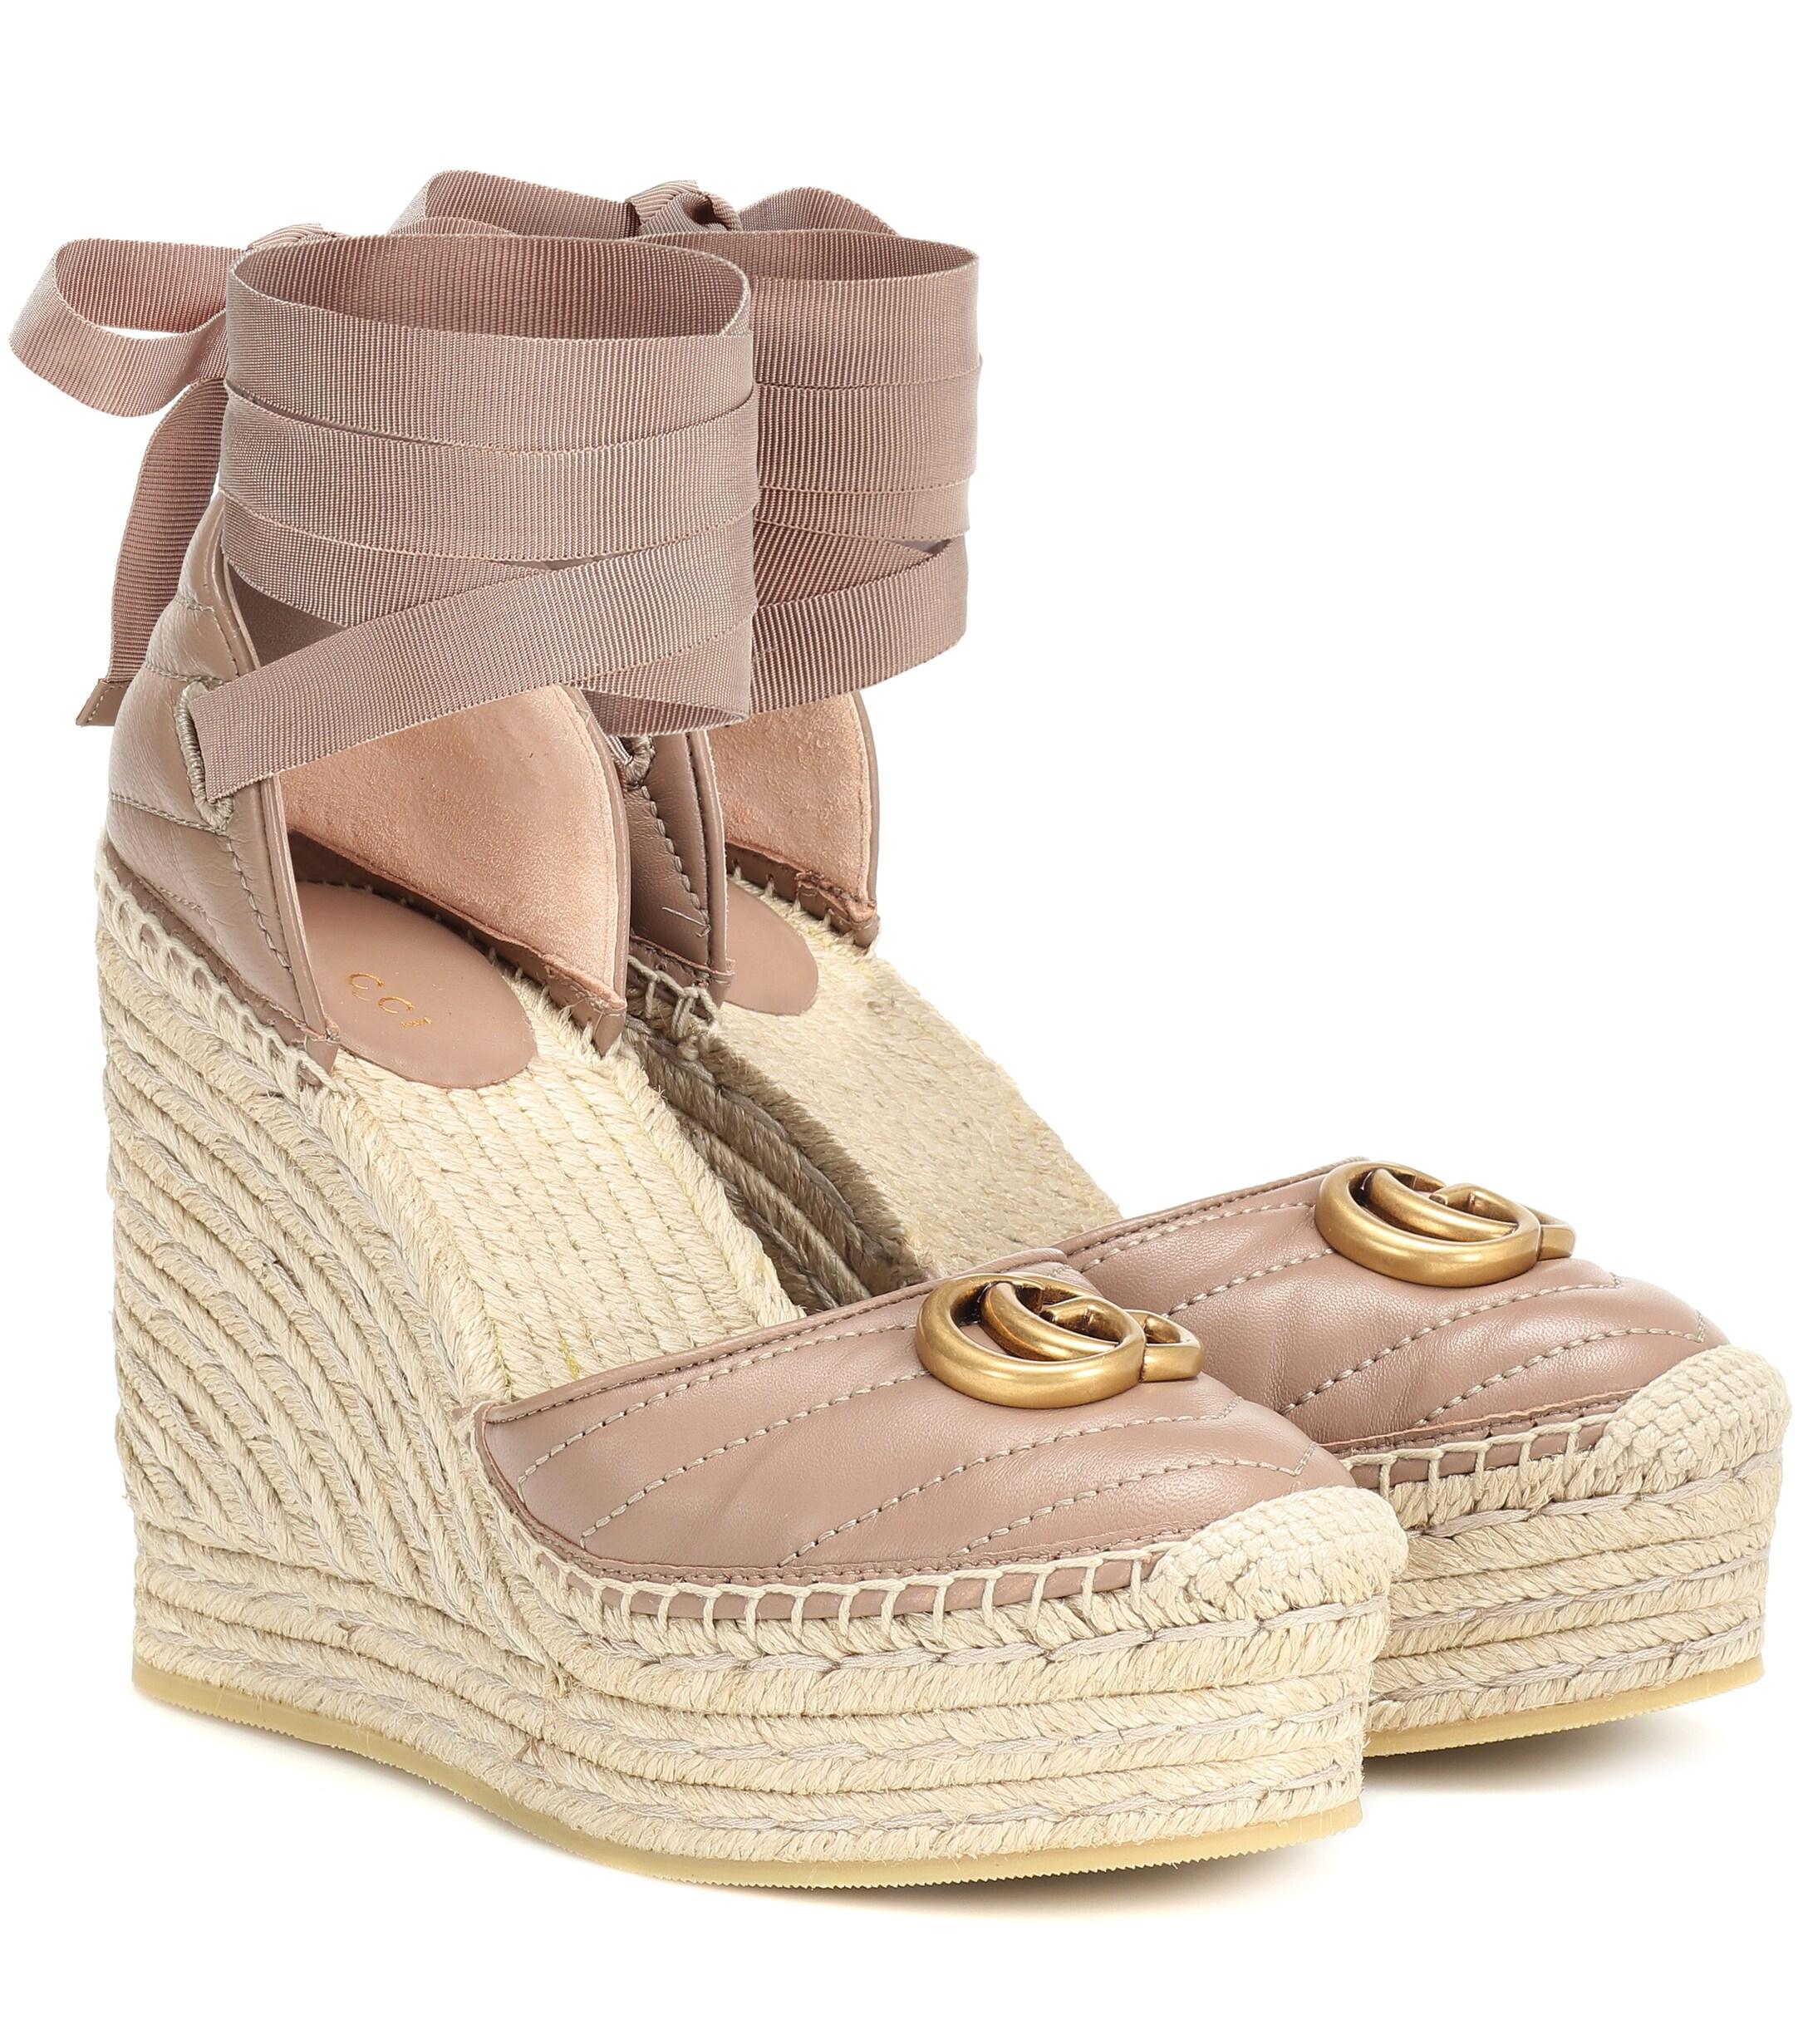 komponist Støt modstand Gucci Double G Leather Espadrille Wedges | Lyst